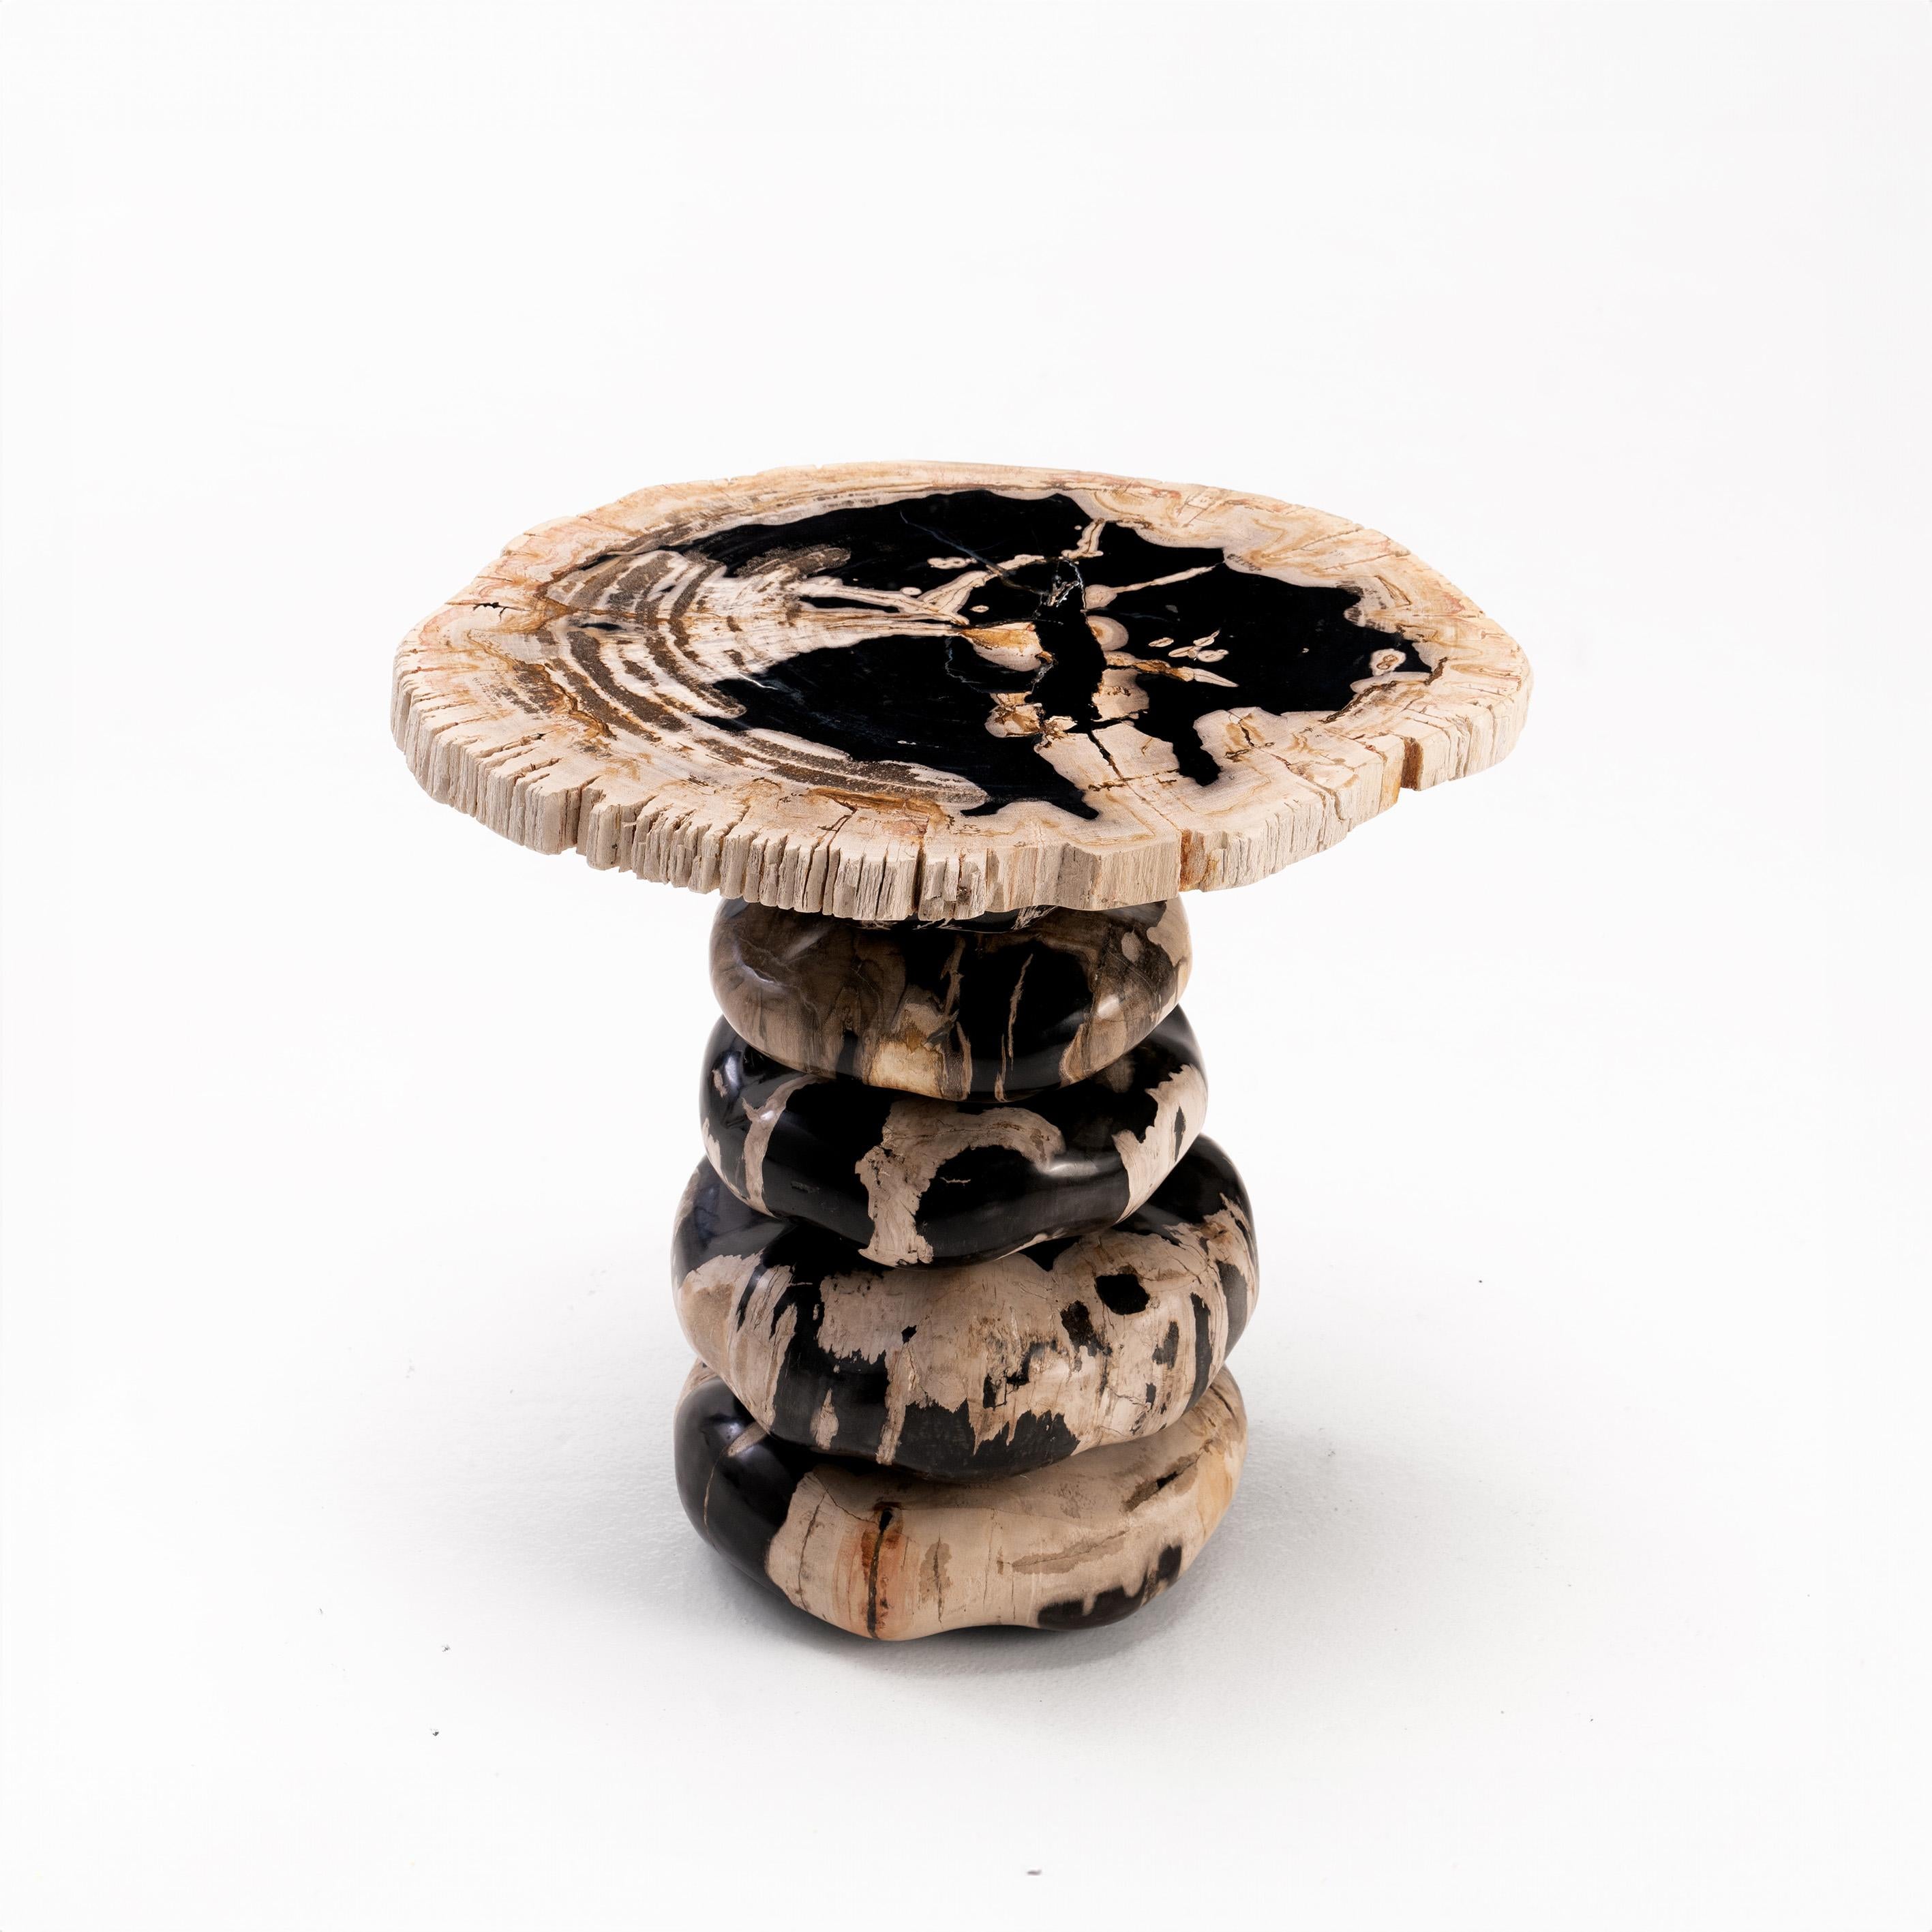 Born from our lifelong obsession with stacking rocks, this totem-like side table features hand-sculpted, organic shaped petrified wood forms, adorned with a striking raw Petrified wood slice.

This is a meticulously hand sculptured product. Each